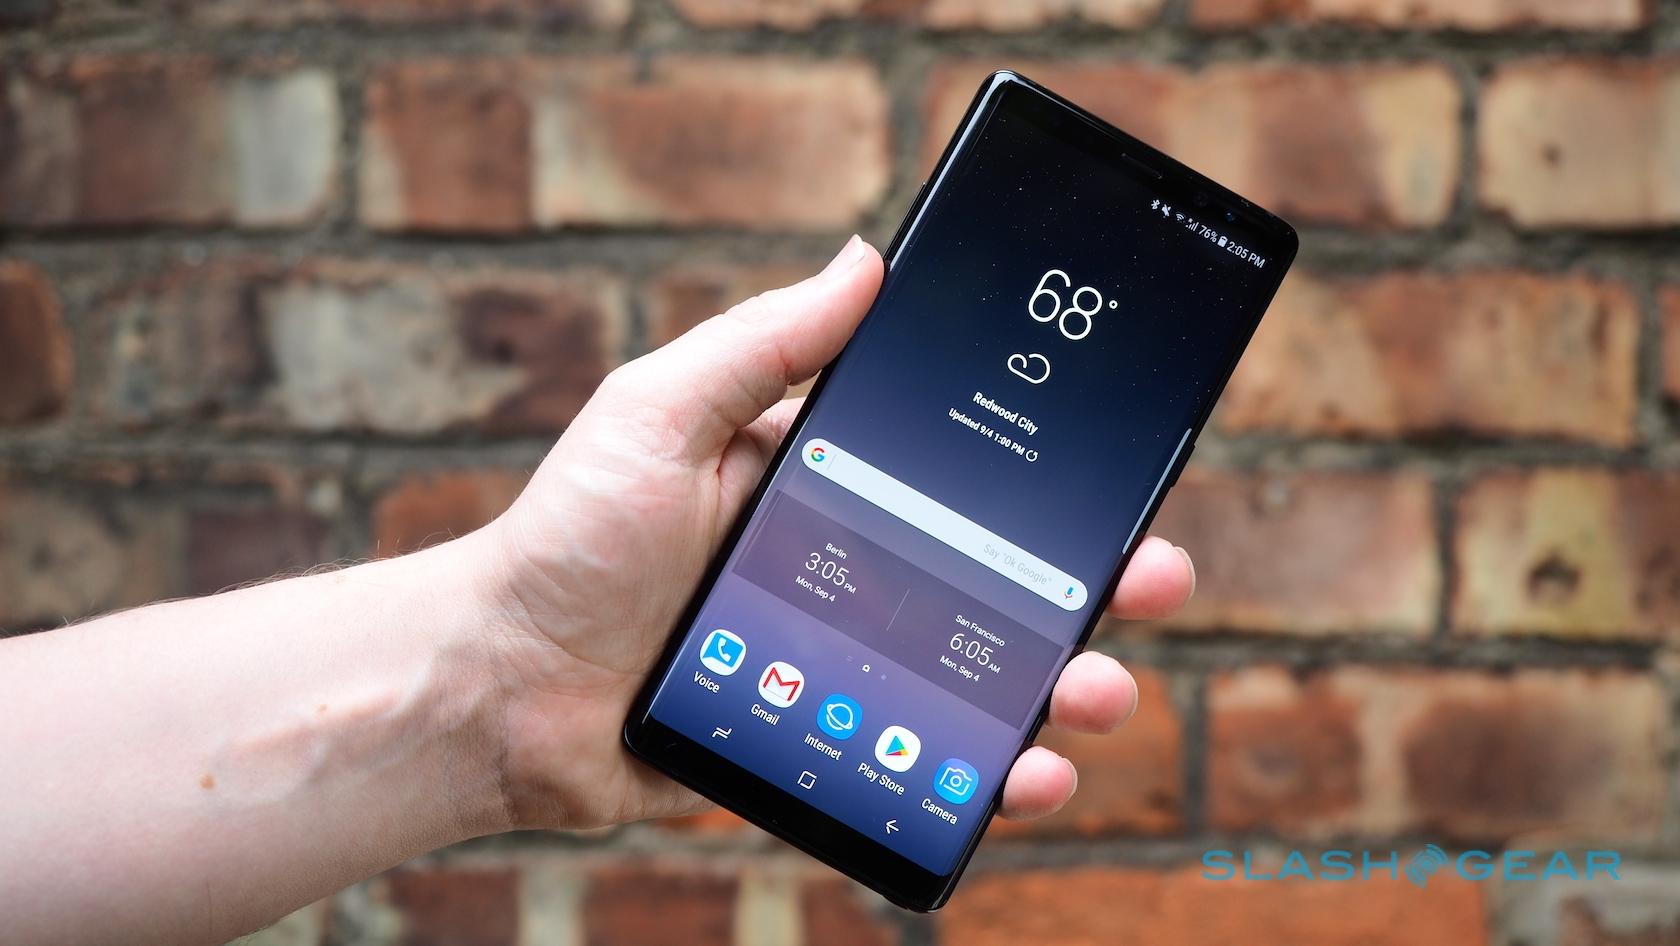 Galaxy Note 8 is already breaking Samsung sales records